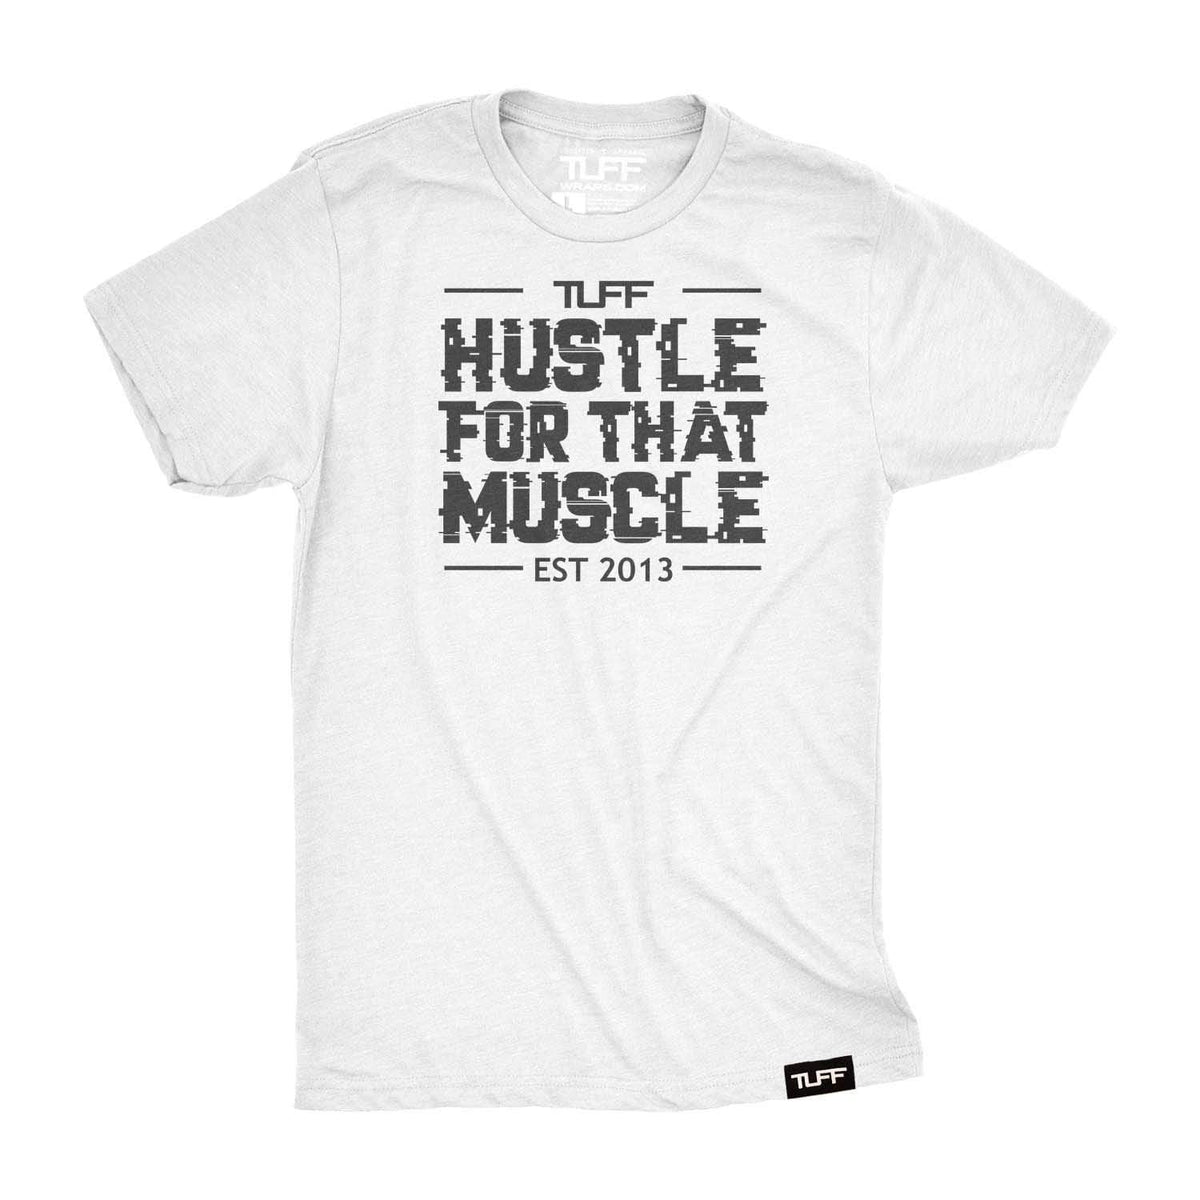 Hustle For That Muscle Tee S / White TuffWraps.com